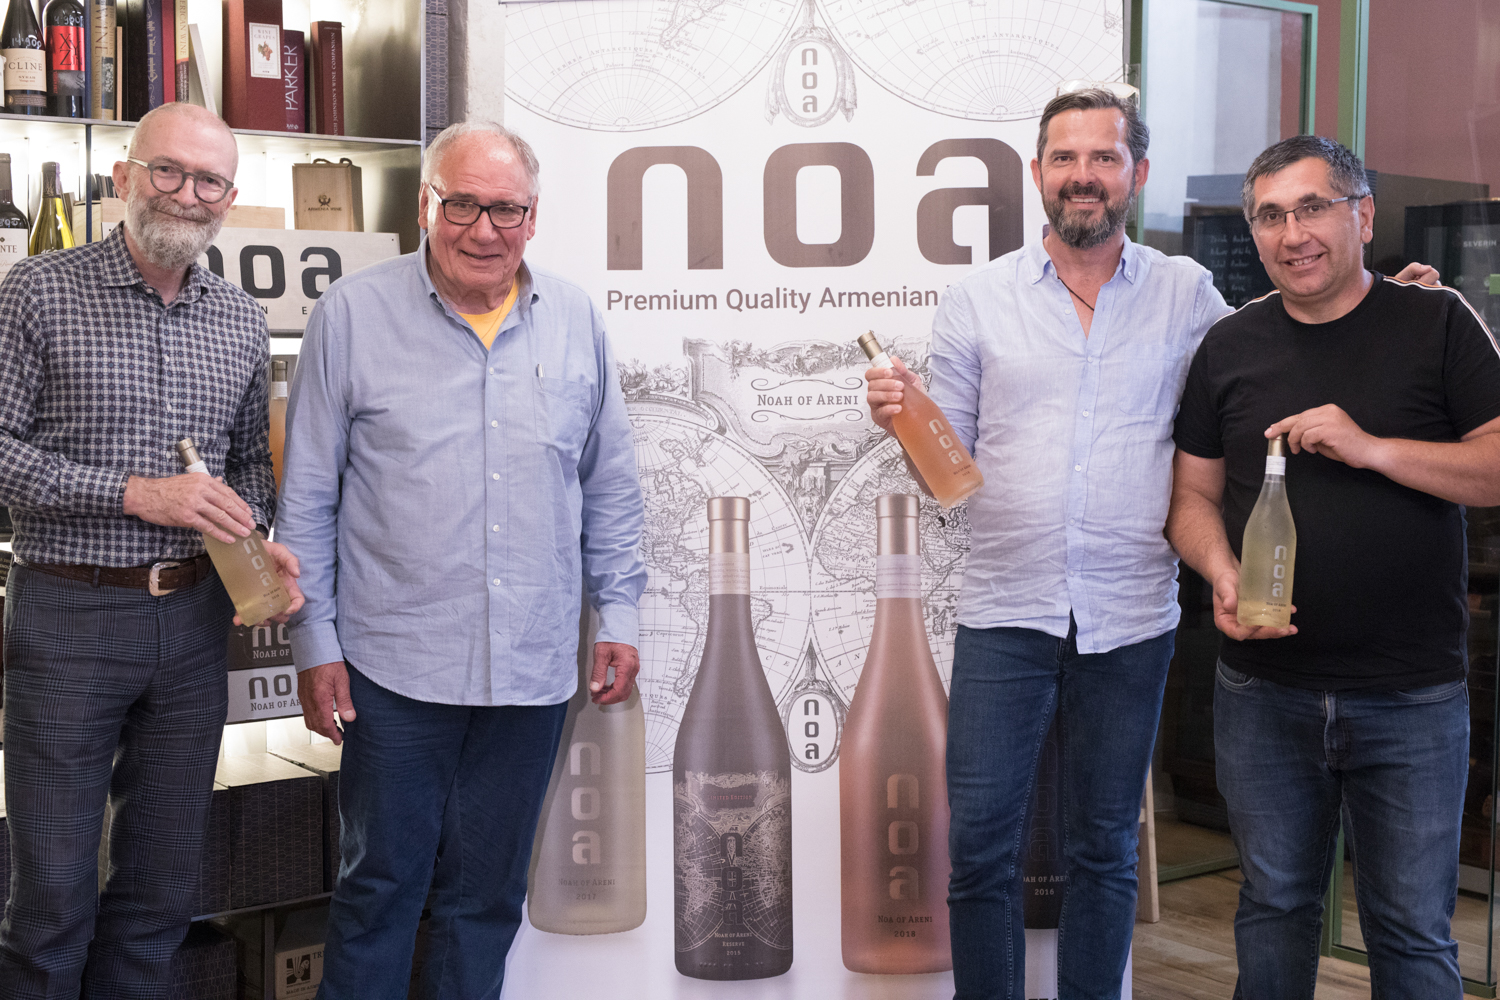 NOA Wines presents its first sweet variety, white and natural